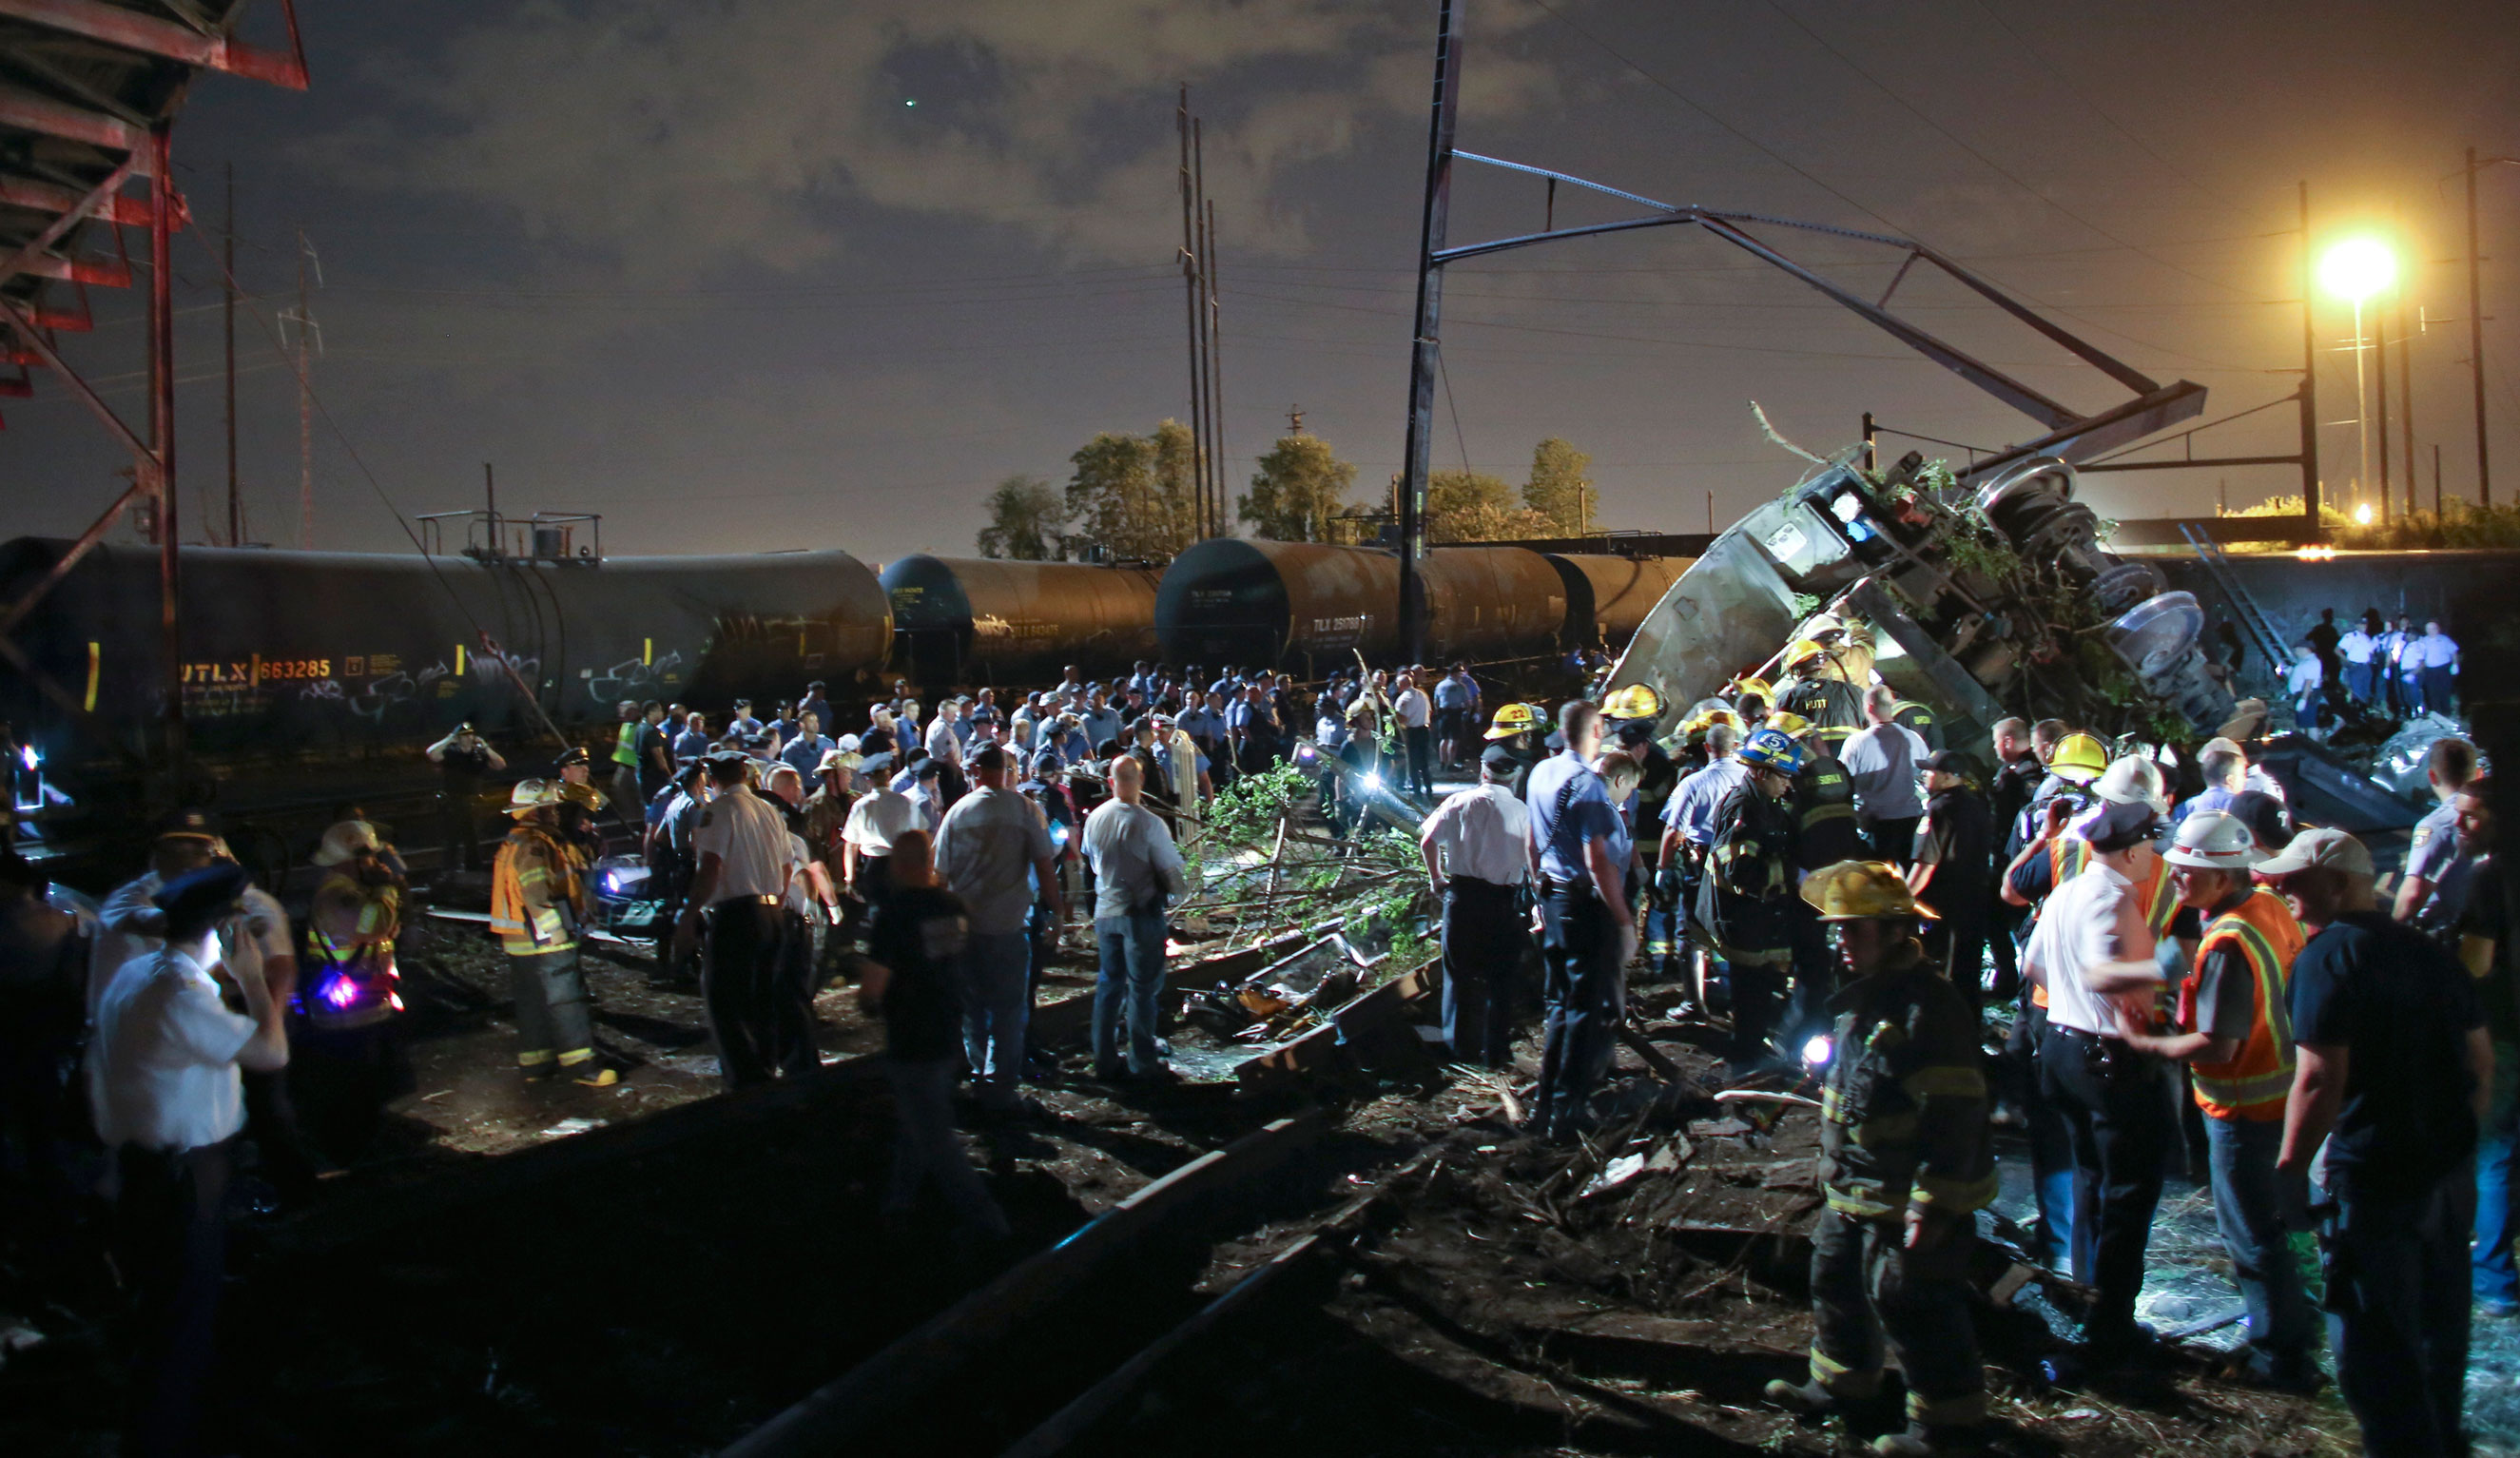 Emergency personnel work the scene of the Amtrak train wreck on May 12, 2015 in Philadelphia.